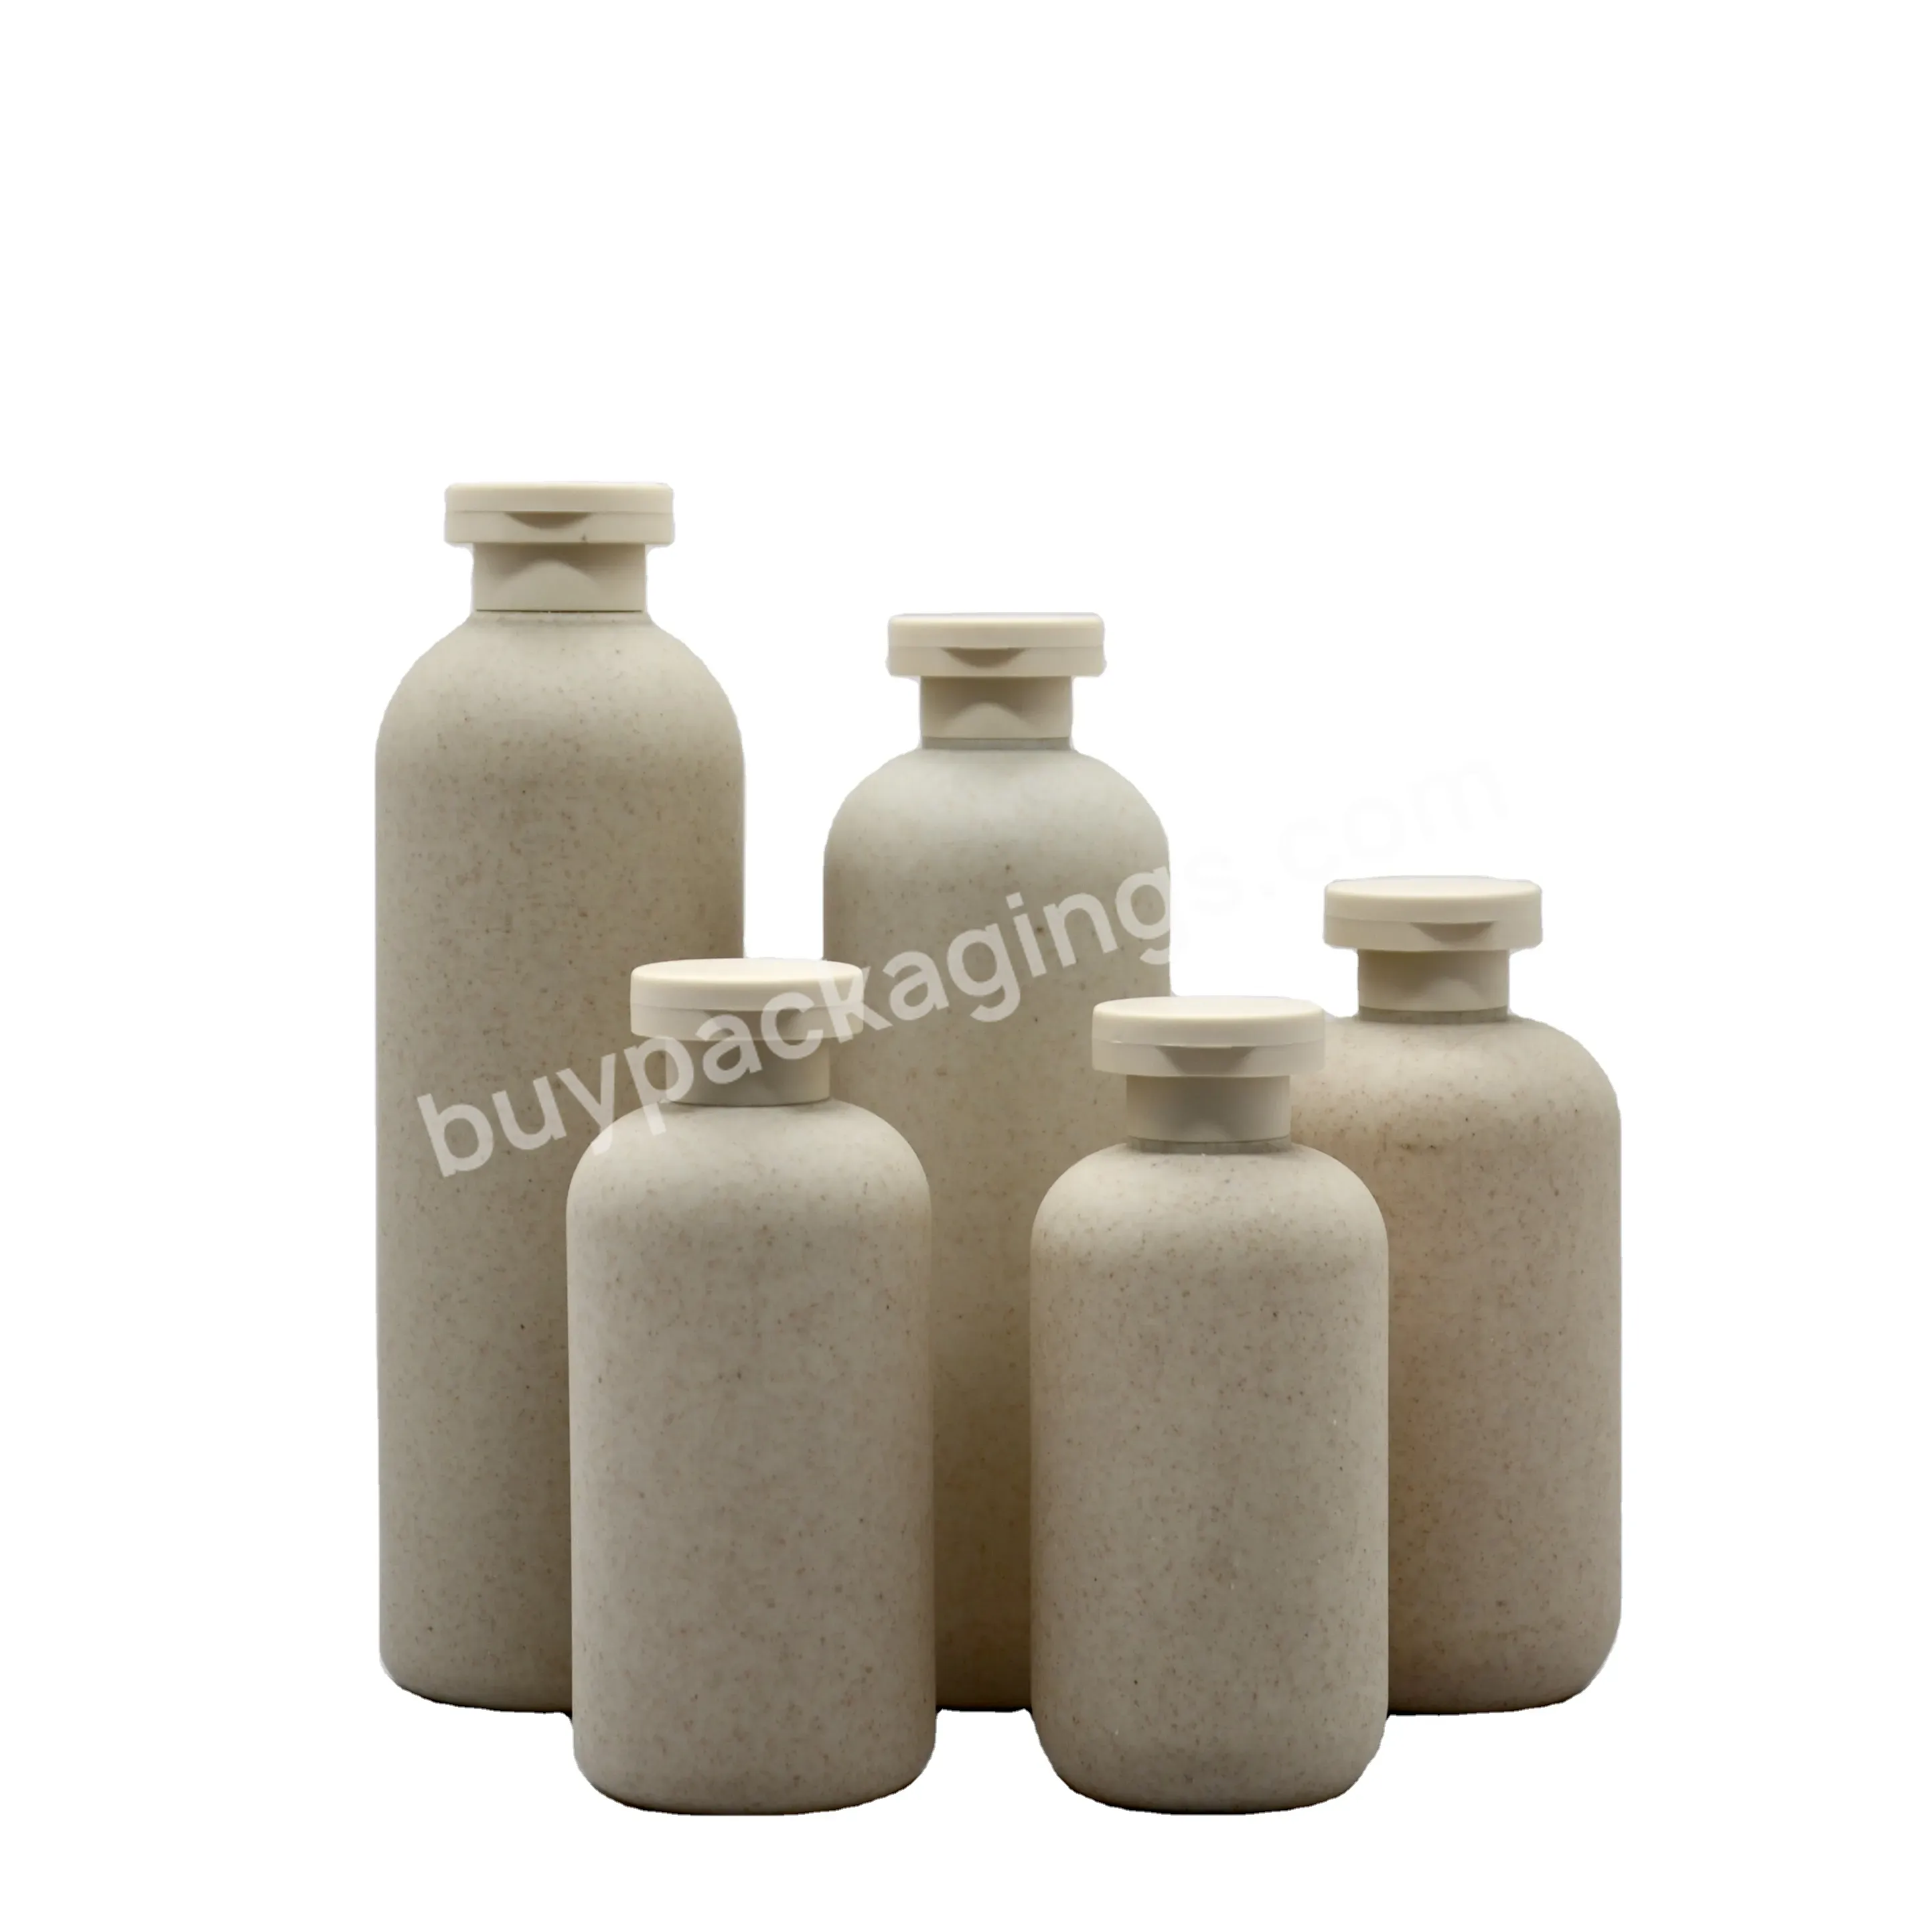 Degradable Biodegradable Material Wheat Straw Bottle Hand And Body Lotion Skin Care Products Body Lotion Customize - Buy Degradable Biodegrade Material Wheat Straw Bottle,Degradable Body Lotion Bottle,Moistur Body Lotion Bottle.